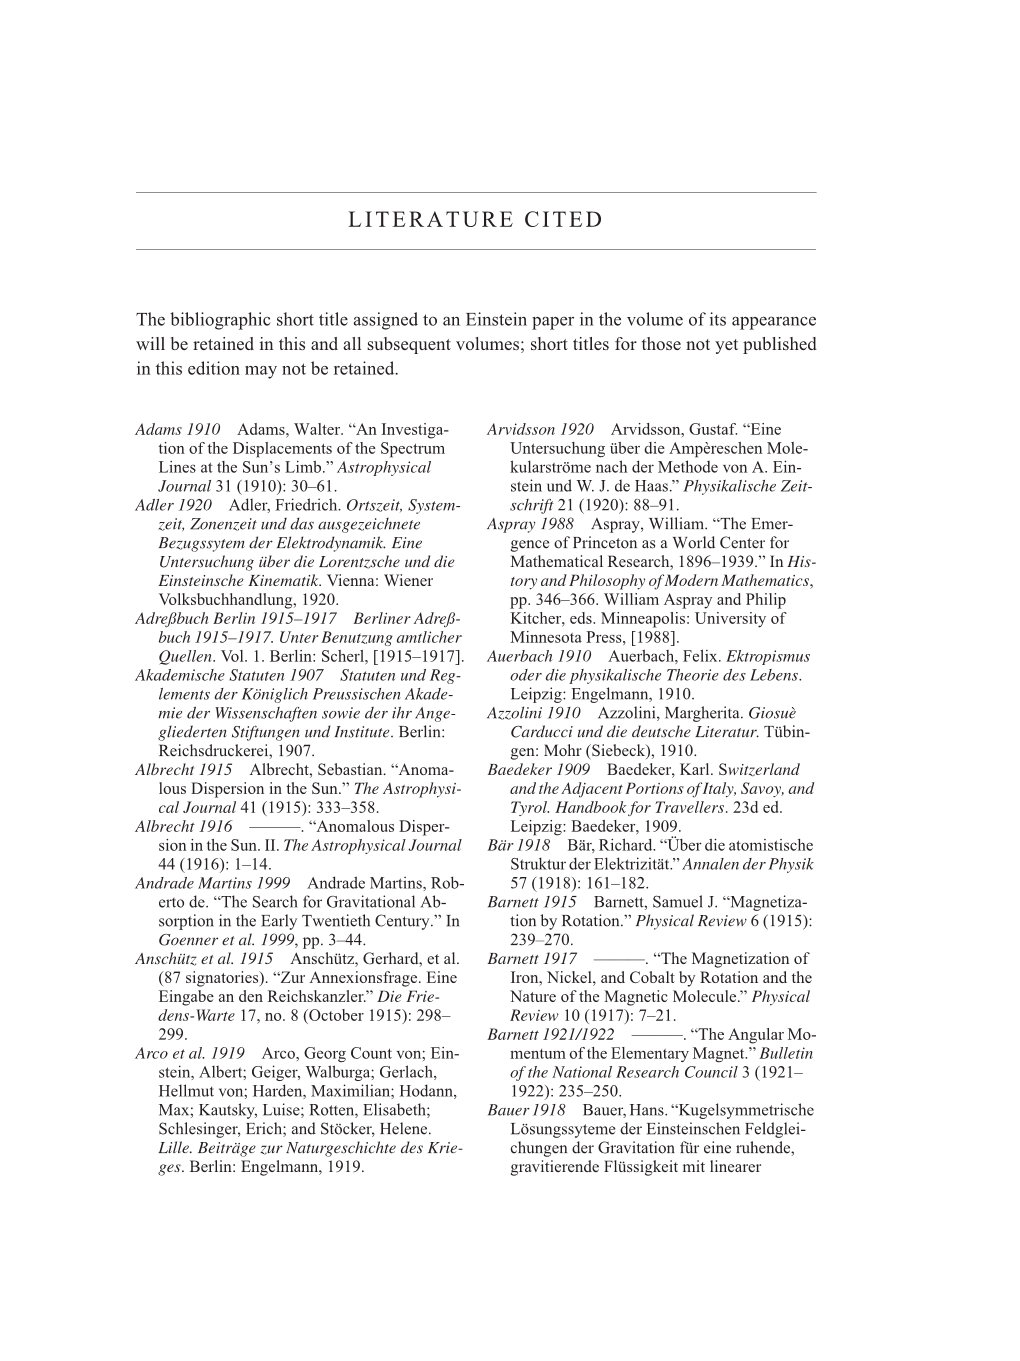 Volume 10: The Berlin Years: Correspondence May-December 1920 / Supplementary Correspondence 1909-1920 page 617